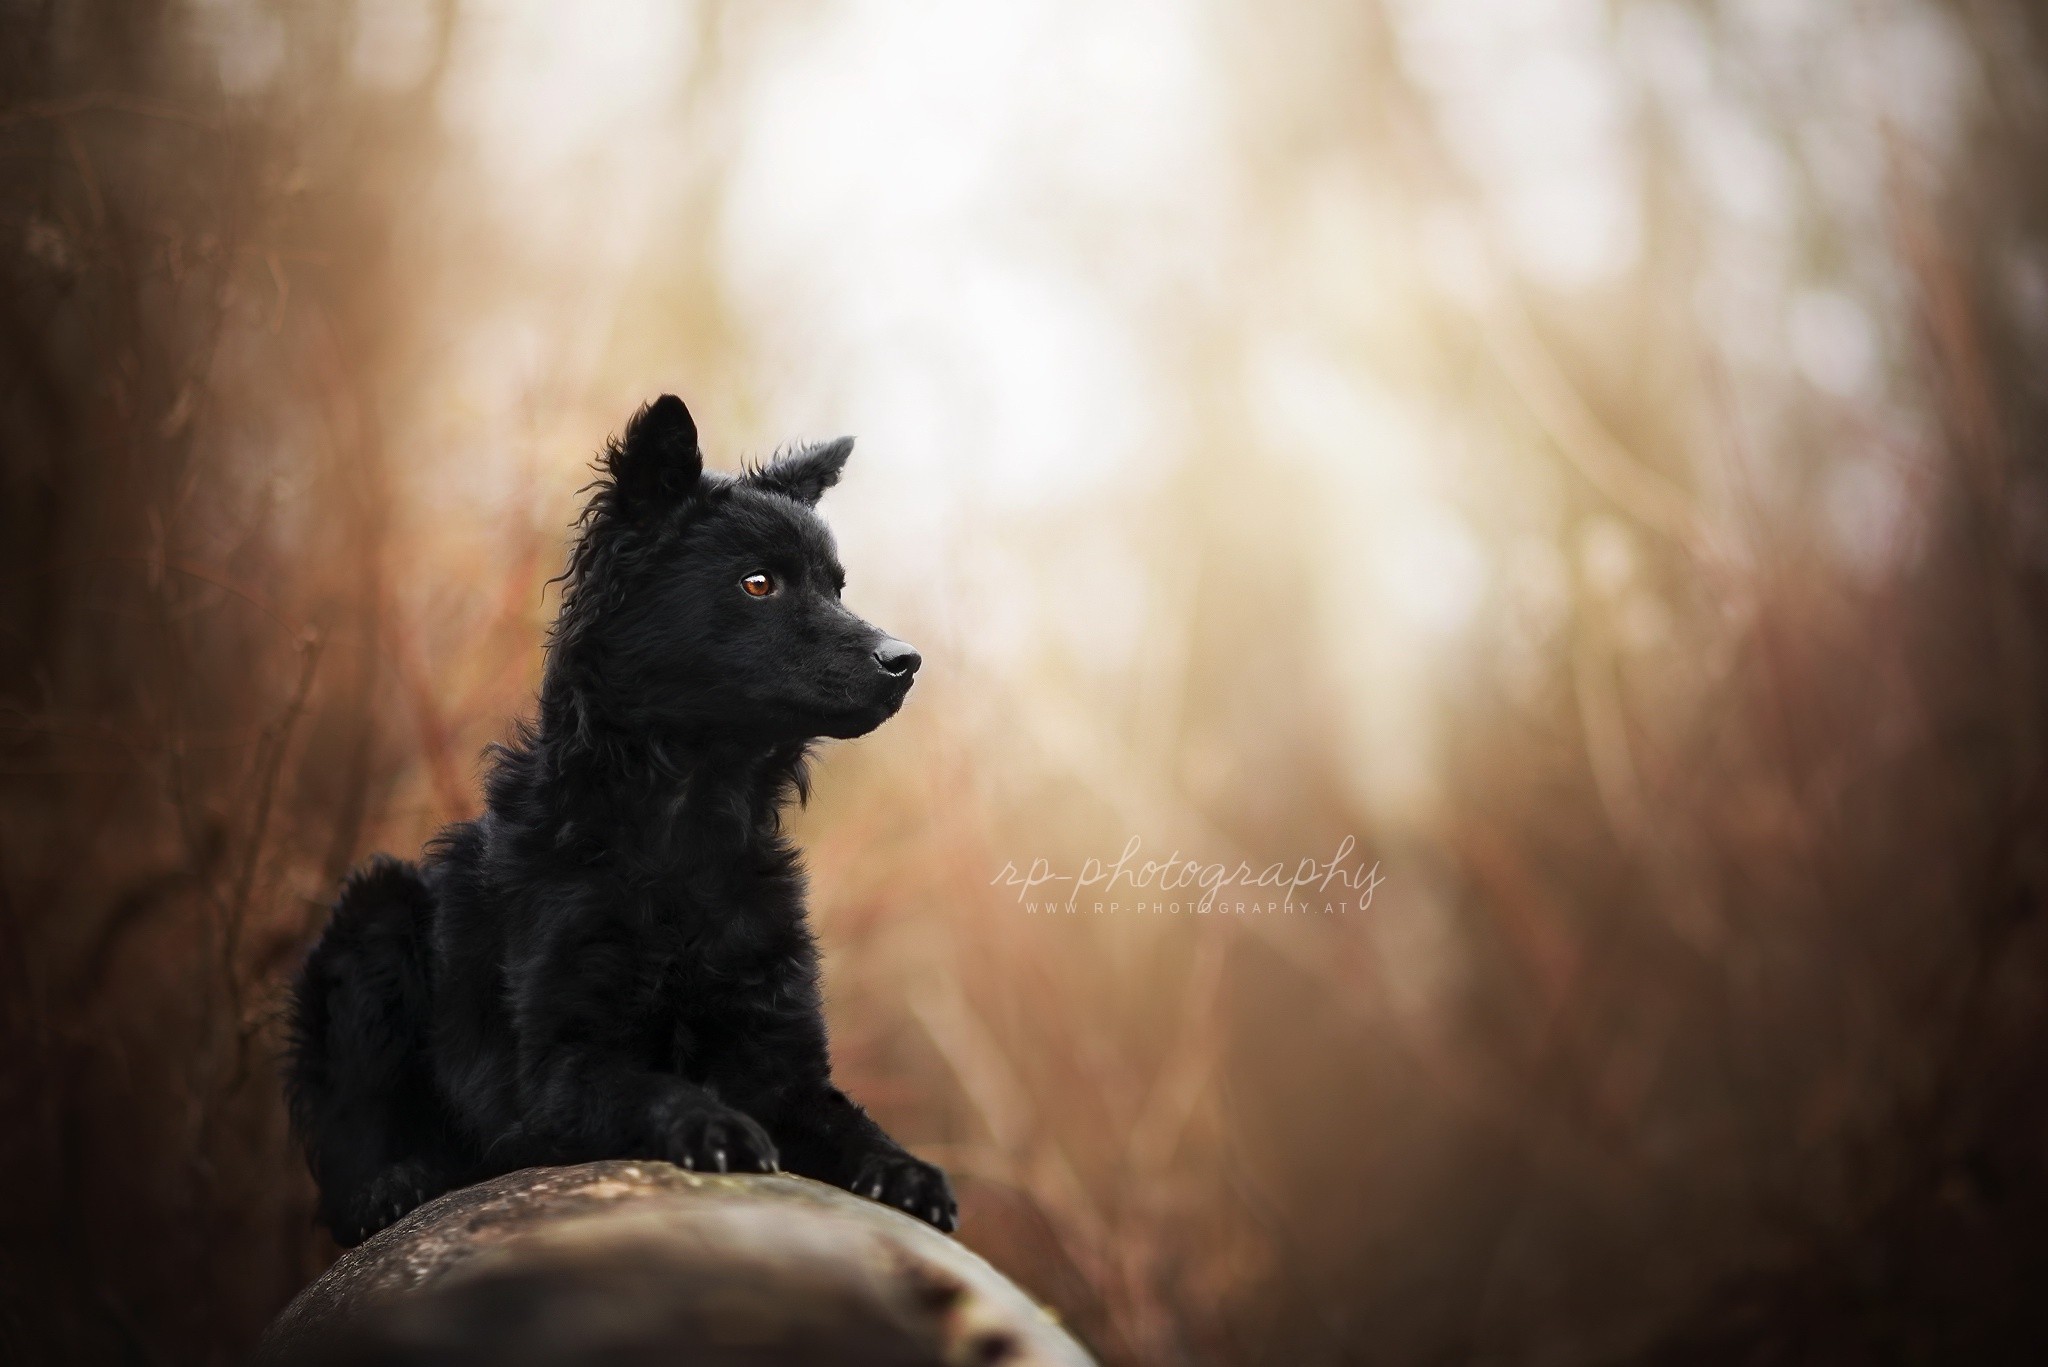 General 2048x1367 animals dog outdoors blurred closeup watermarked